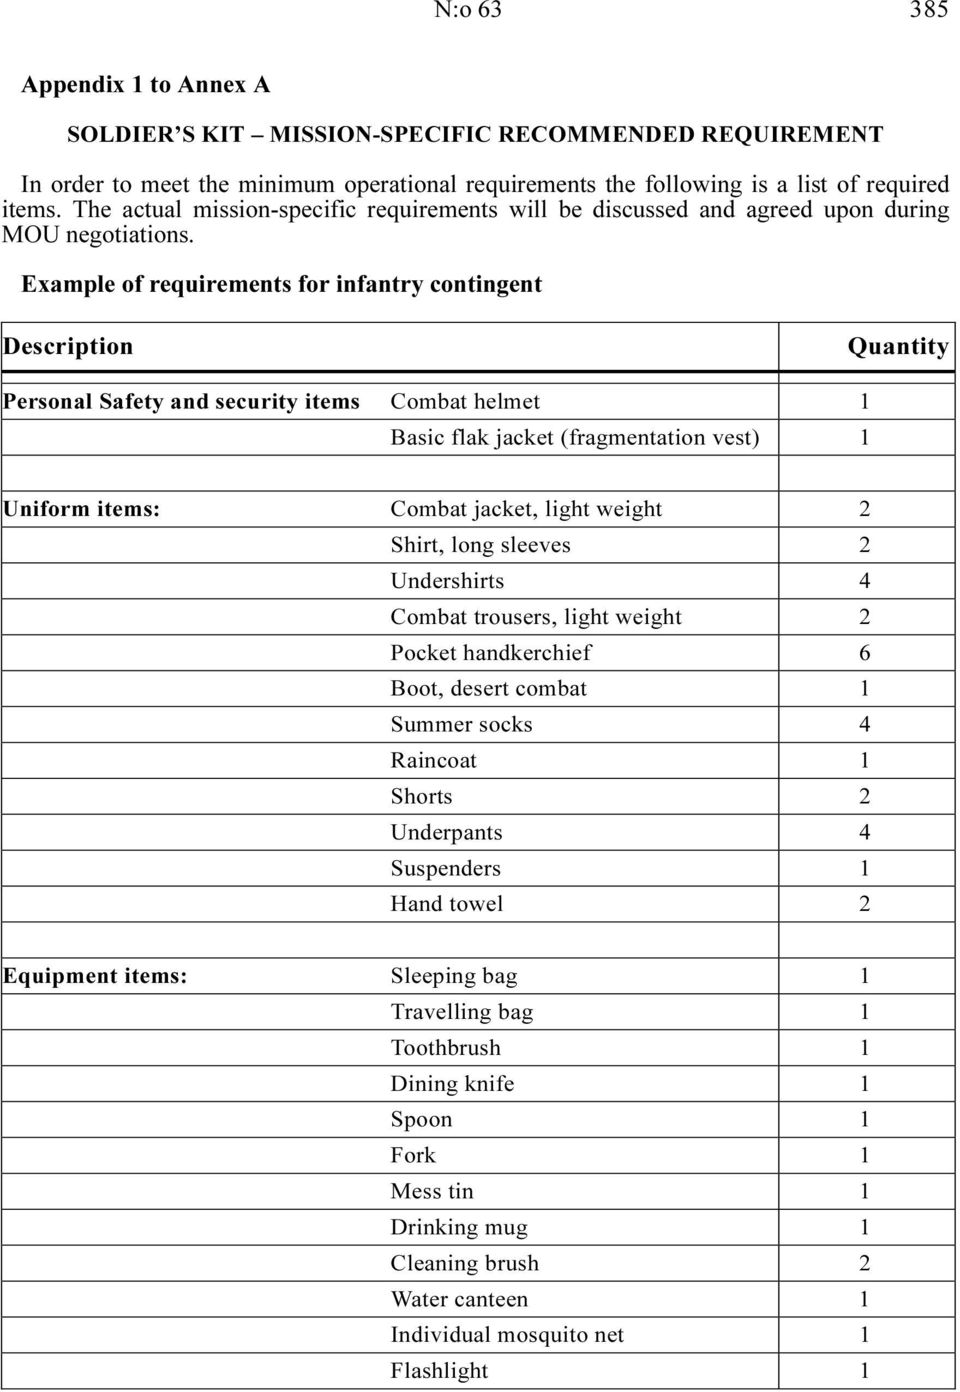 Example of requirements for infantry contingent Description Quantity Personal Safety and security items Combat helmet 1 Basic flak jacket (fragmentation vest) 1 Uniform items: Combat jacket, light